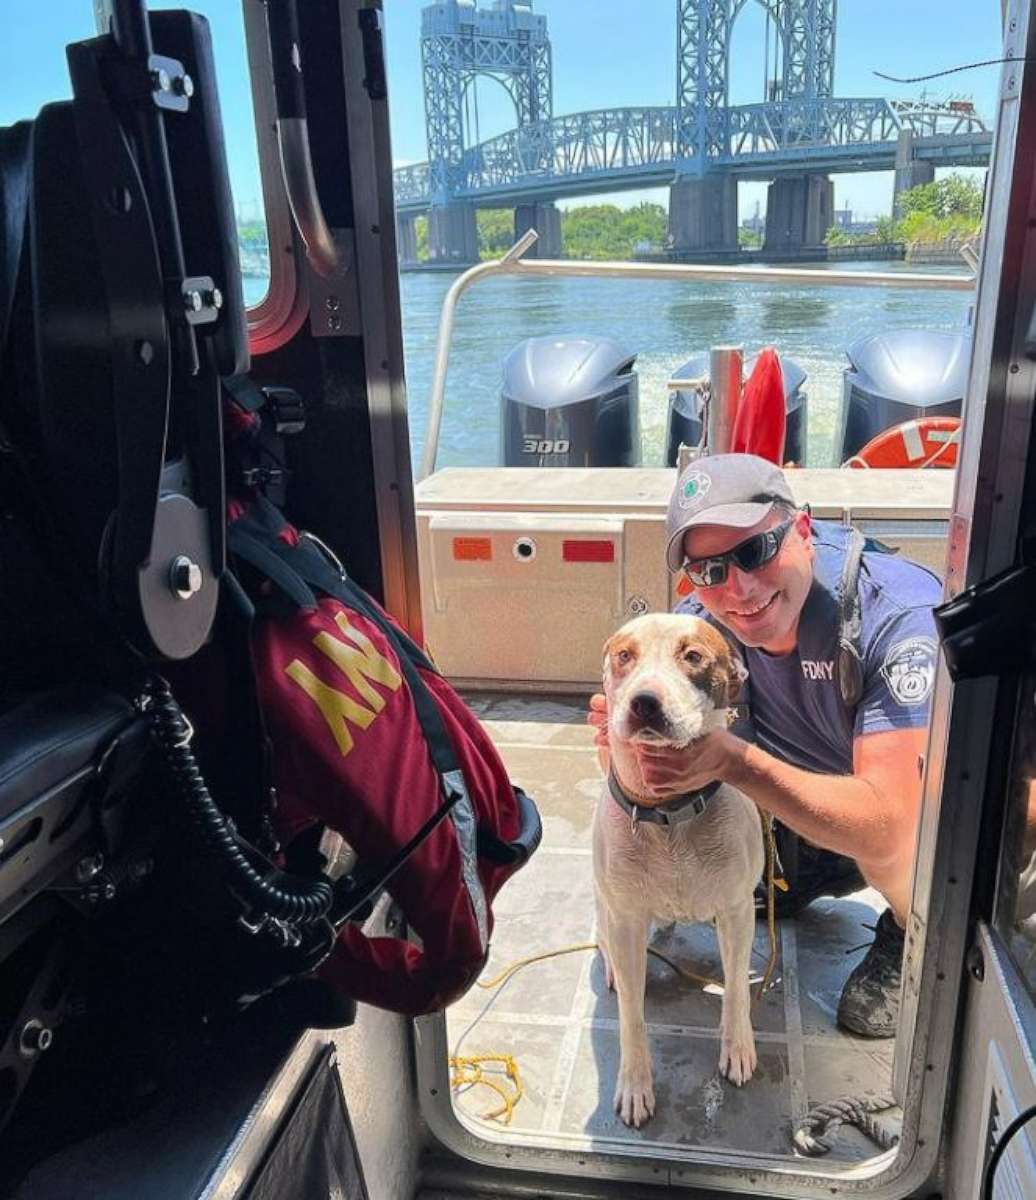 PHOTO: A dog is lucky to be alive after being rescued by a Good Samaritan and officials from the New York Fire Department when he was reportedly thrown off of a bridge and into the Harlem River in New York City on Tuesday, July 19, 2022.